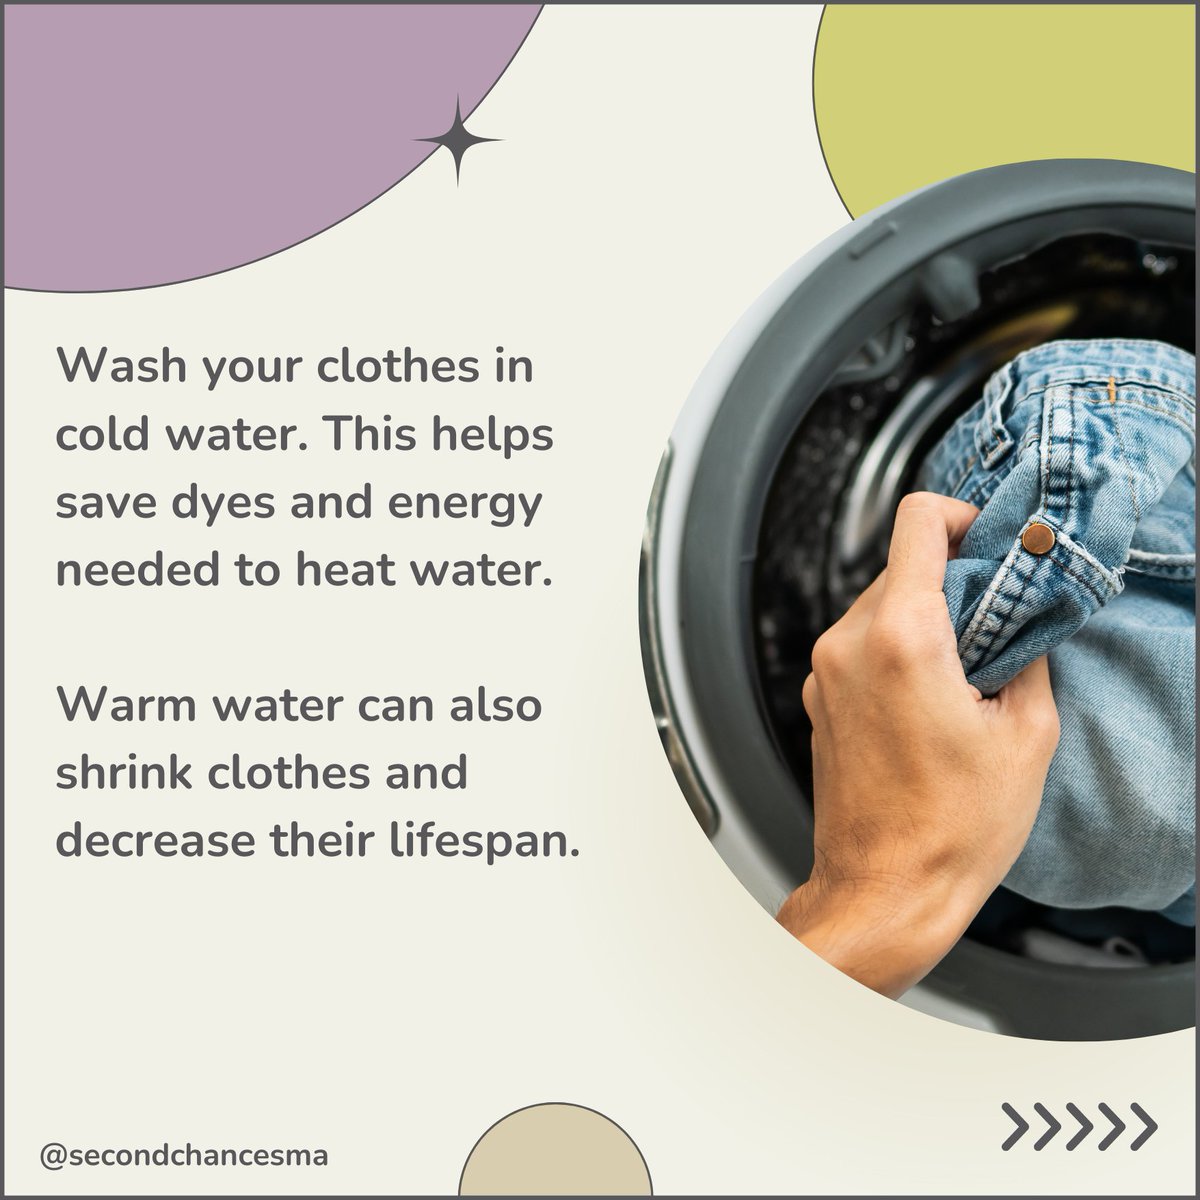 Here are some additional tips for sustainable laundry practice!

#sustainability #laundrytips #earthfriendly #earthday #lovedclotheslast #secondchances